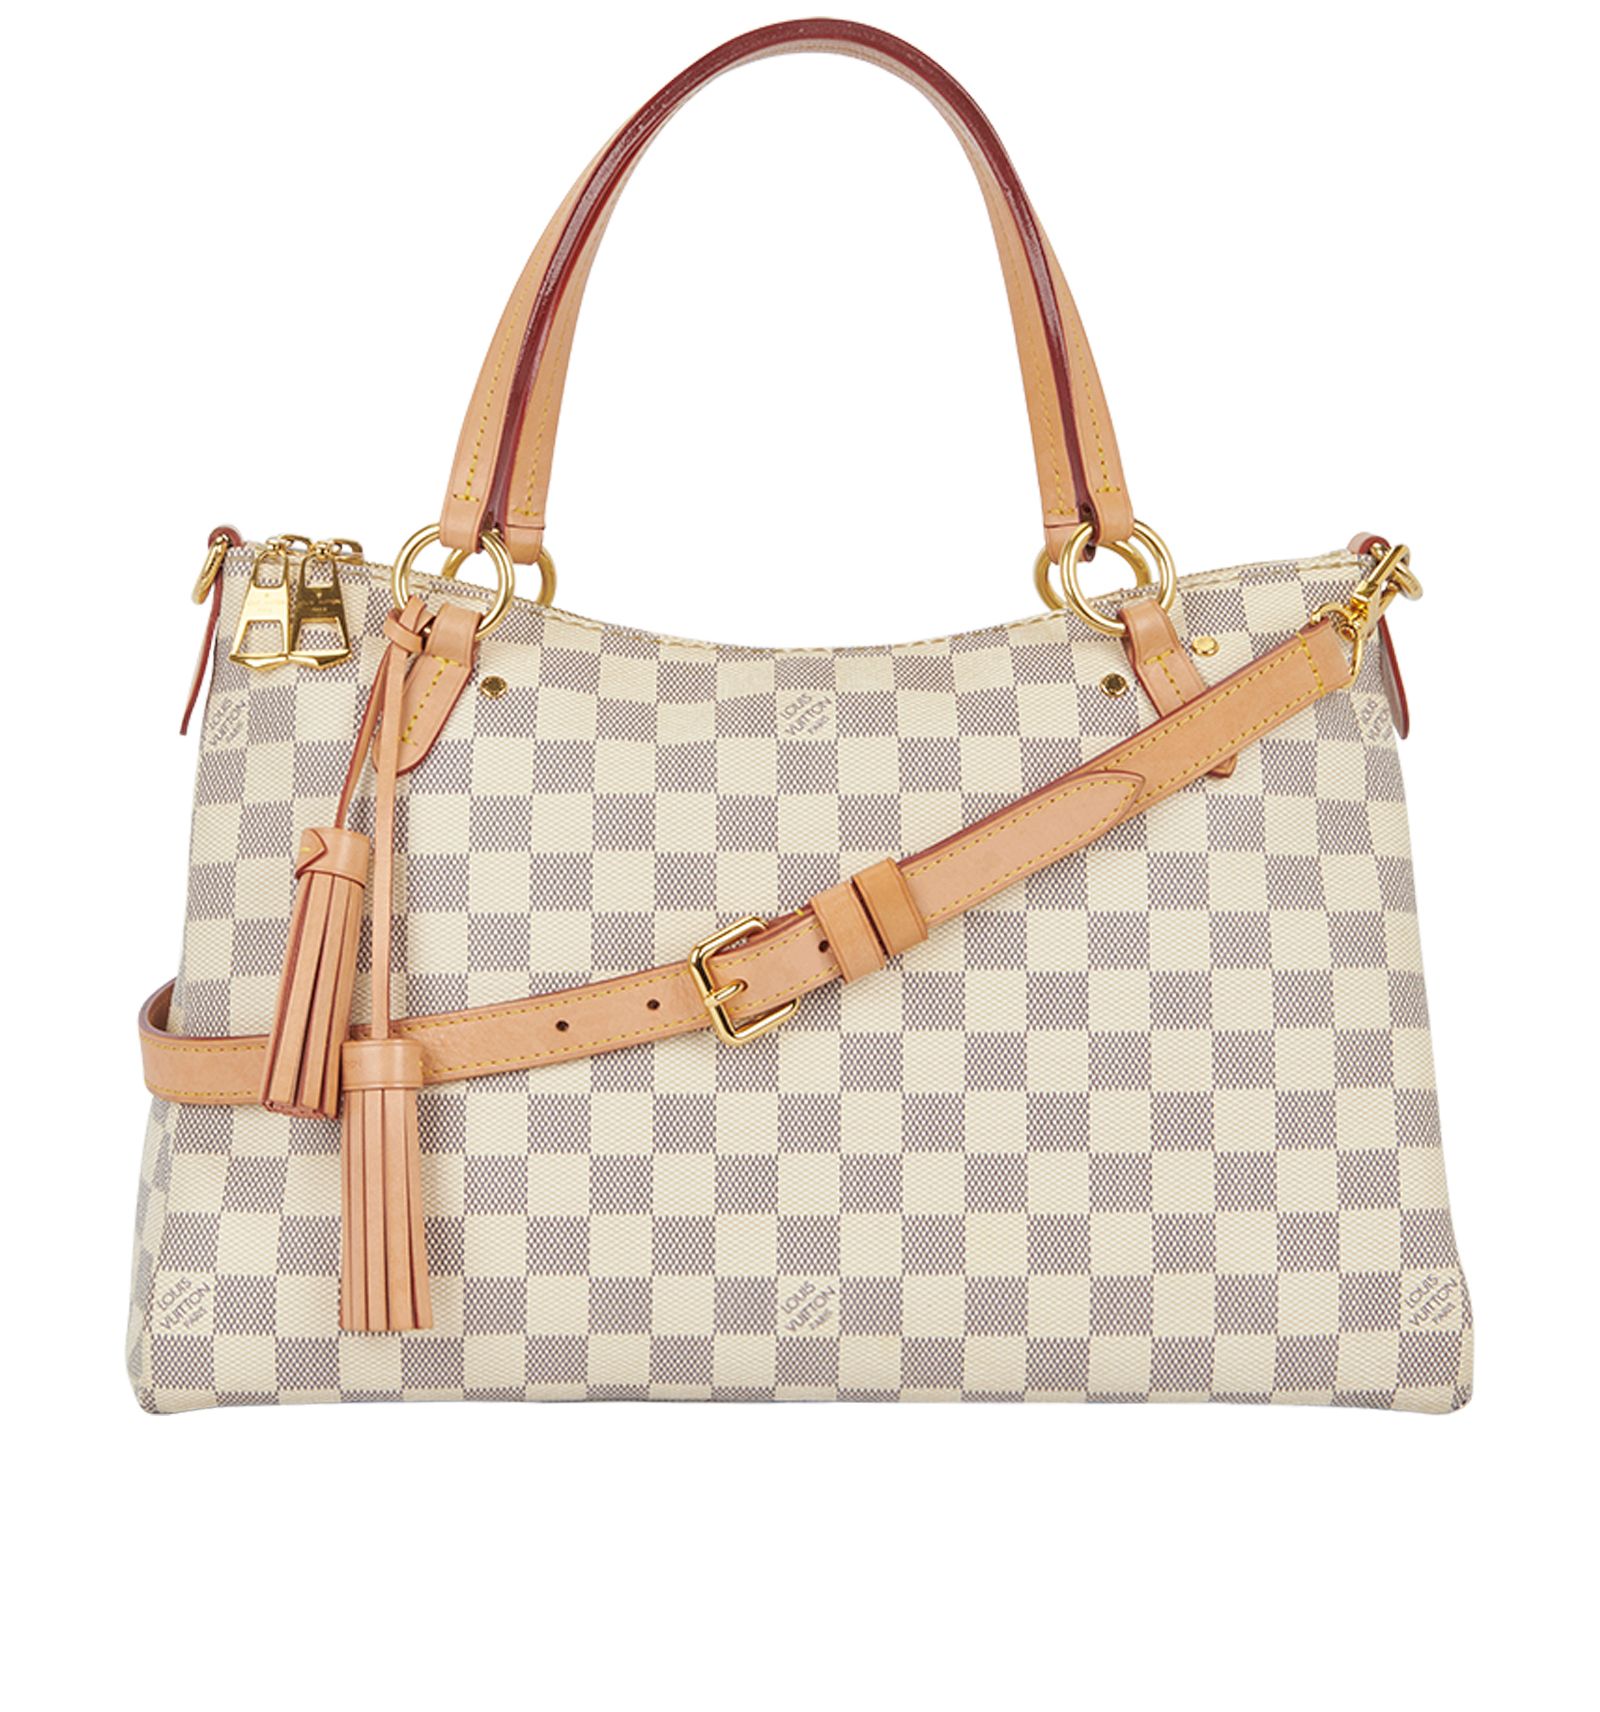 Louis Vuitton Lymington Tote Damier Azur in Coated Canvas with